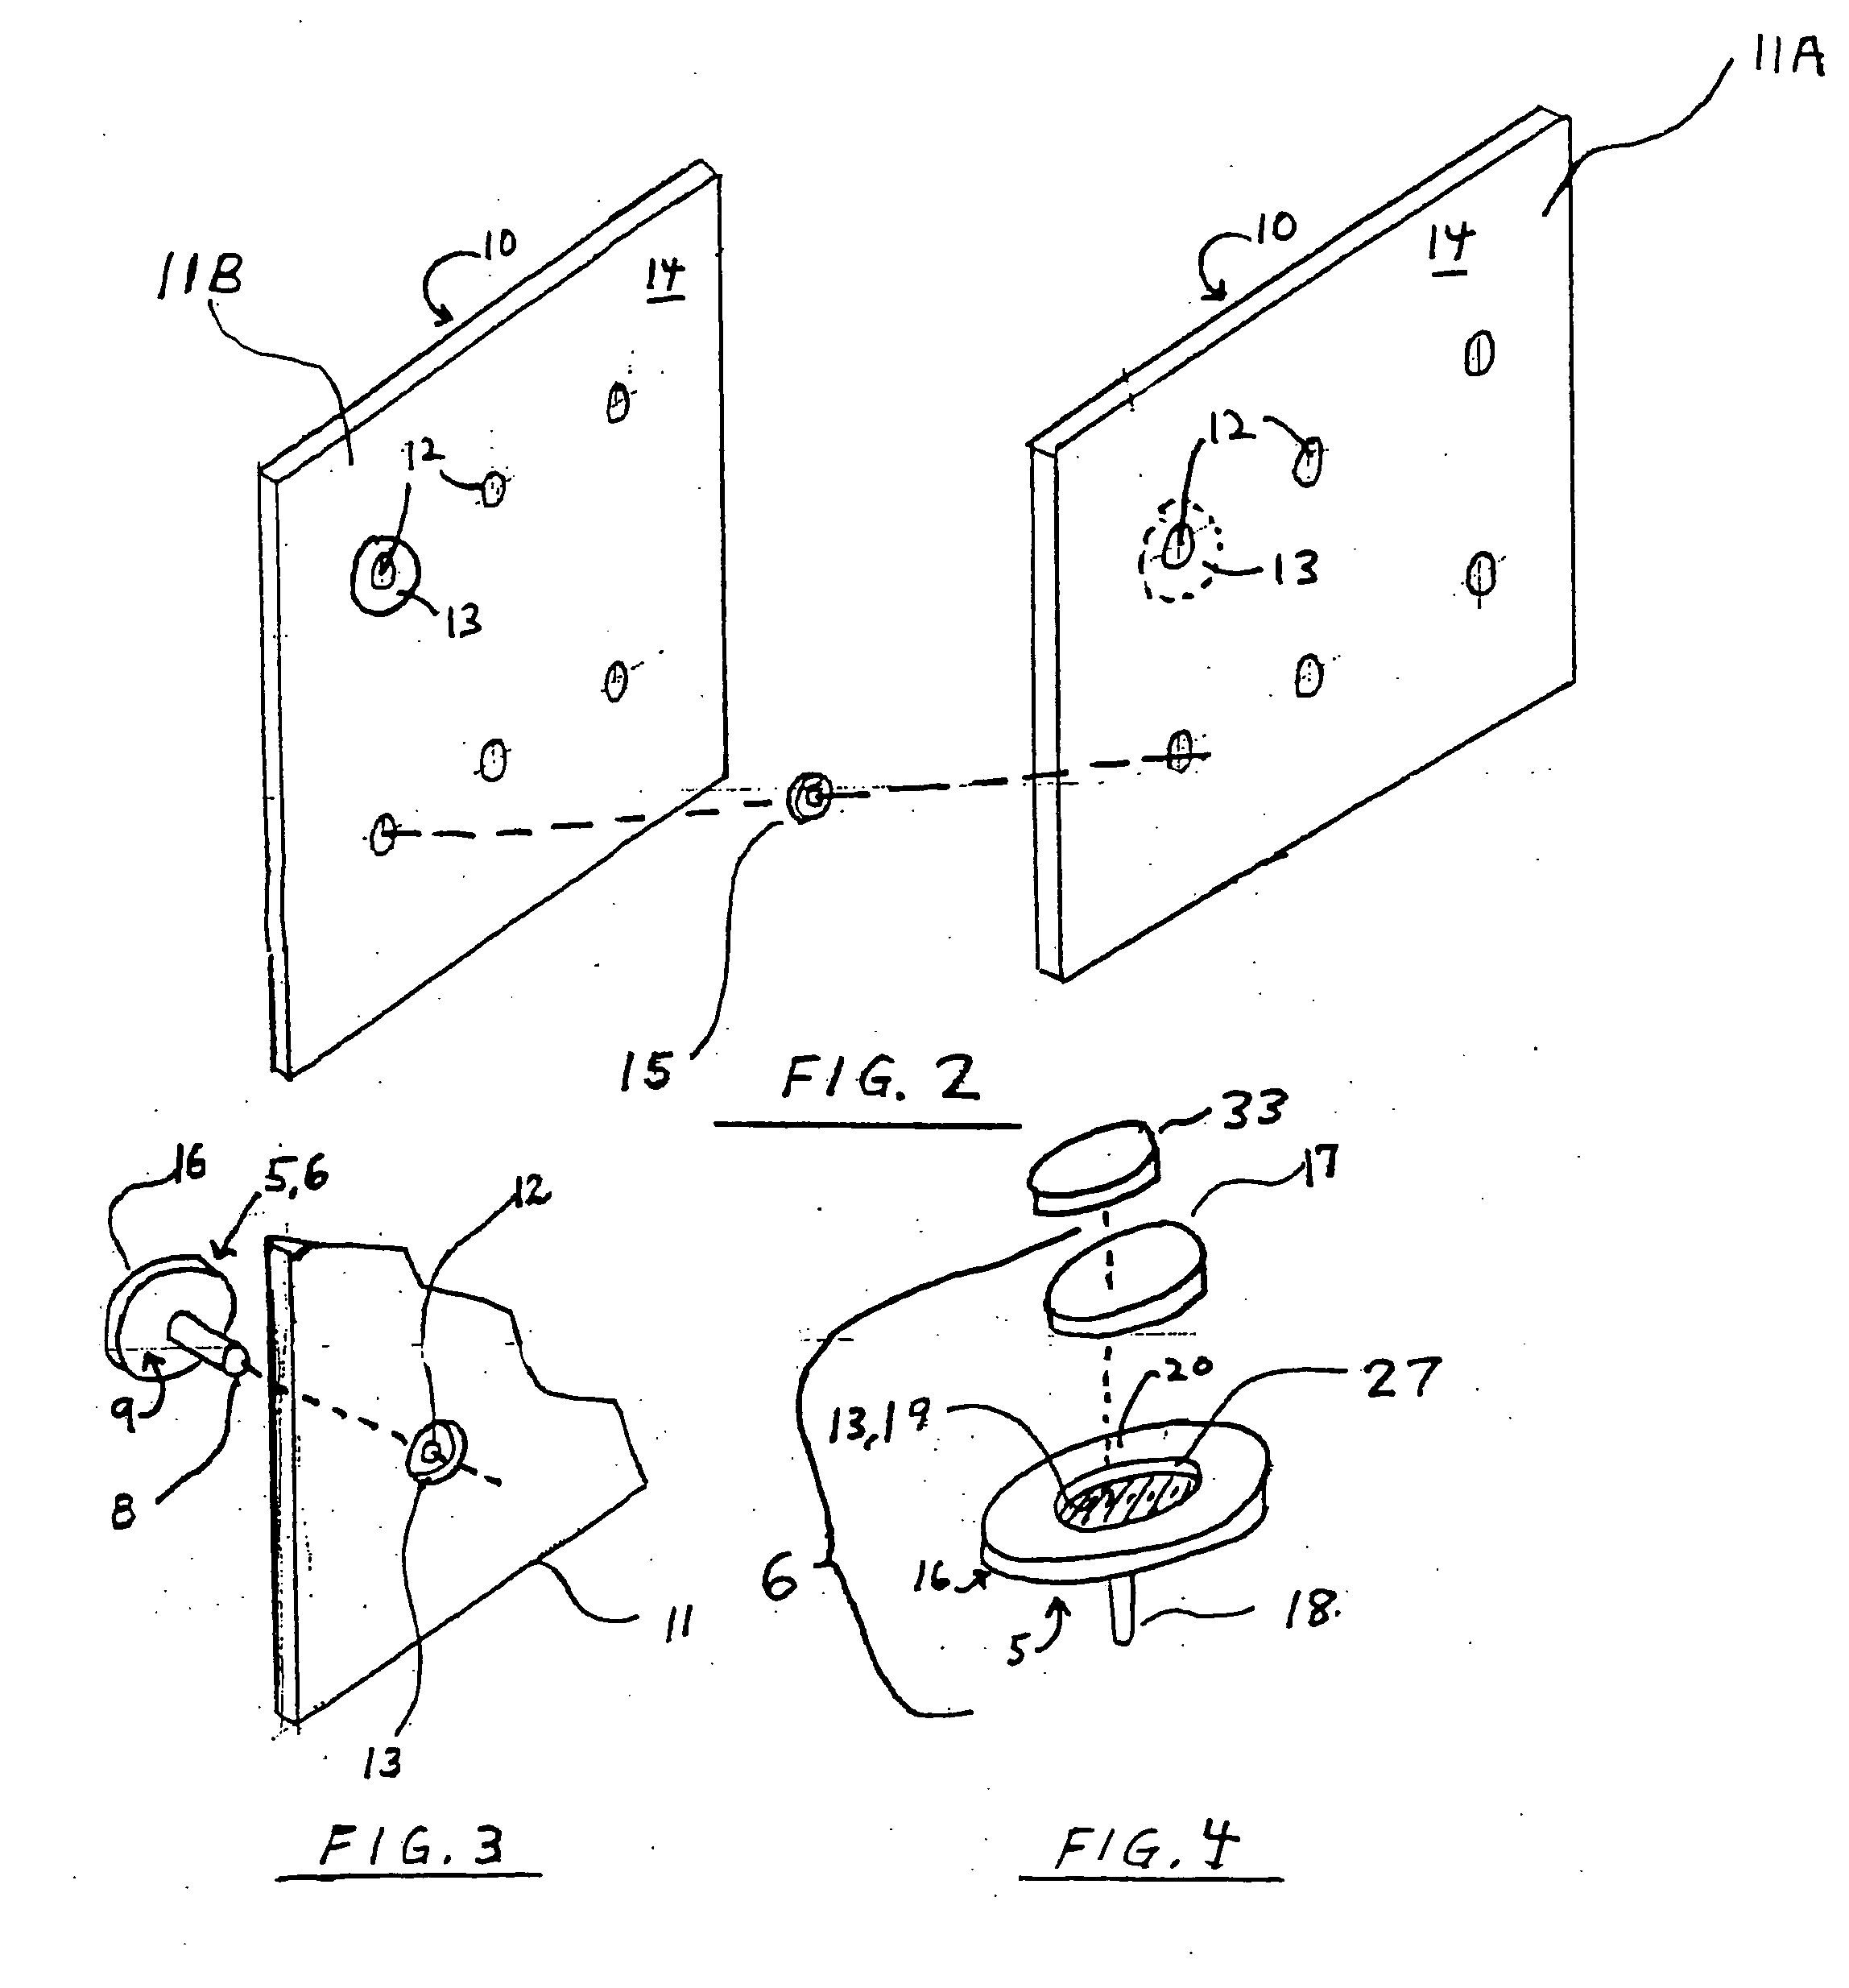 Display and storage device and mount